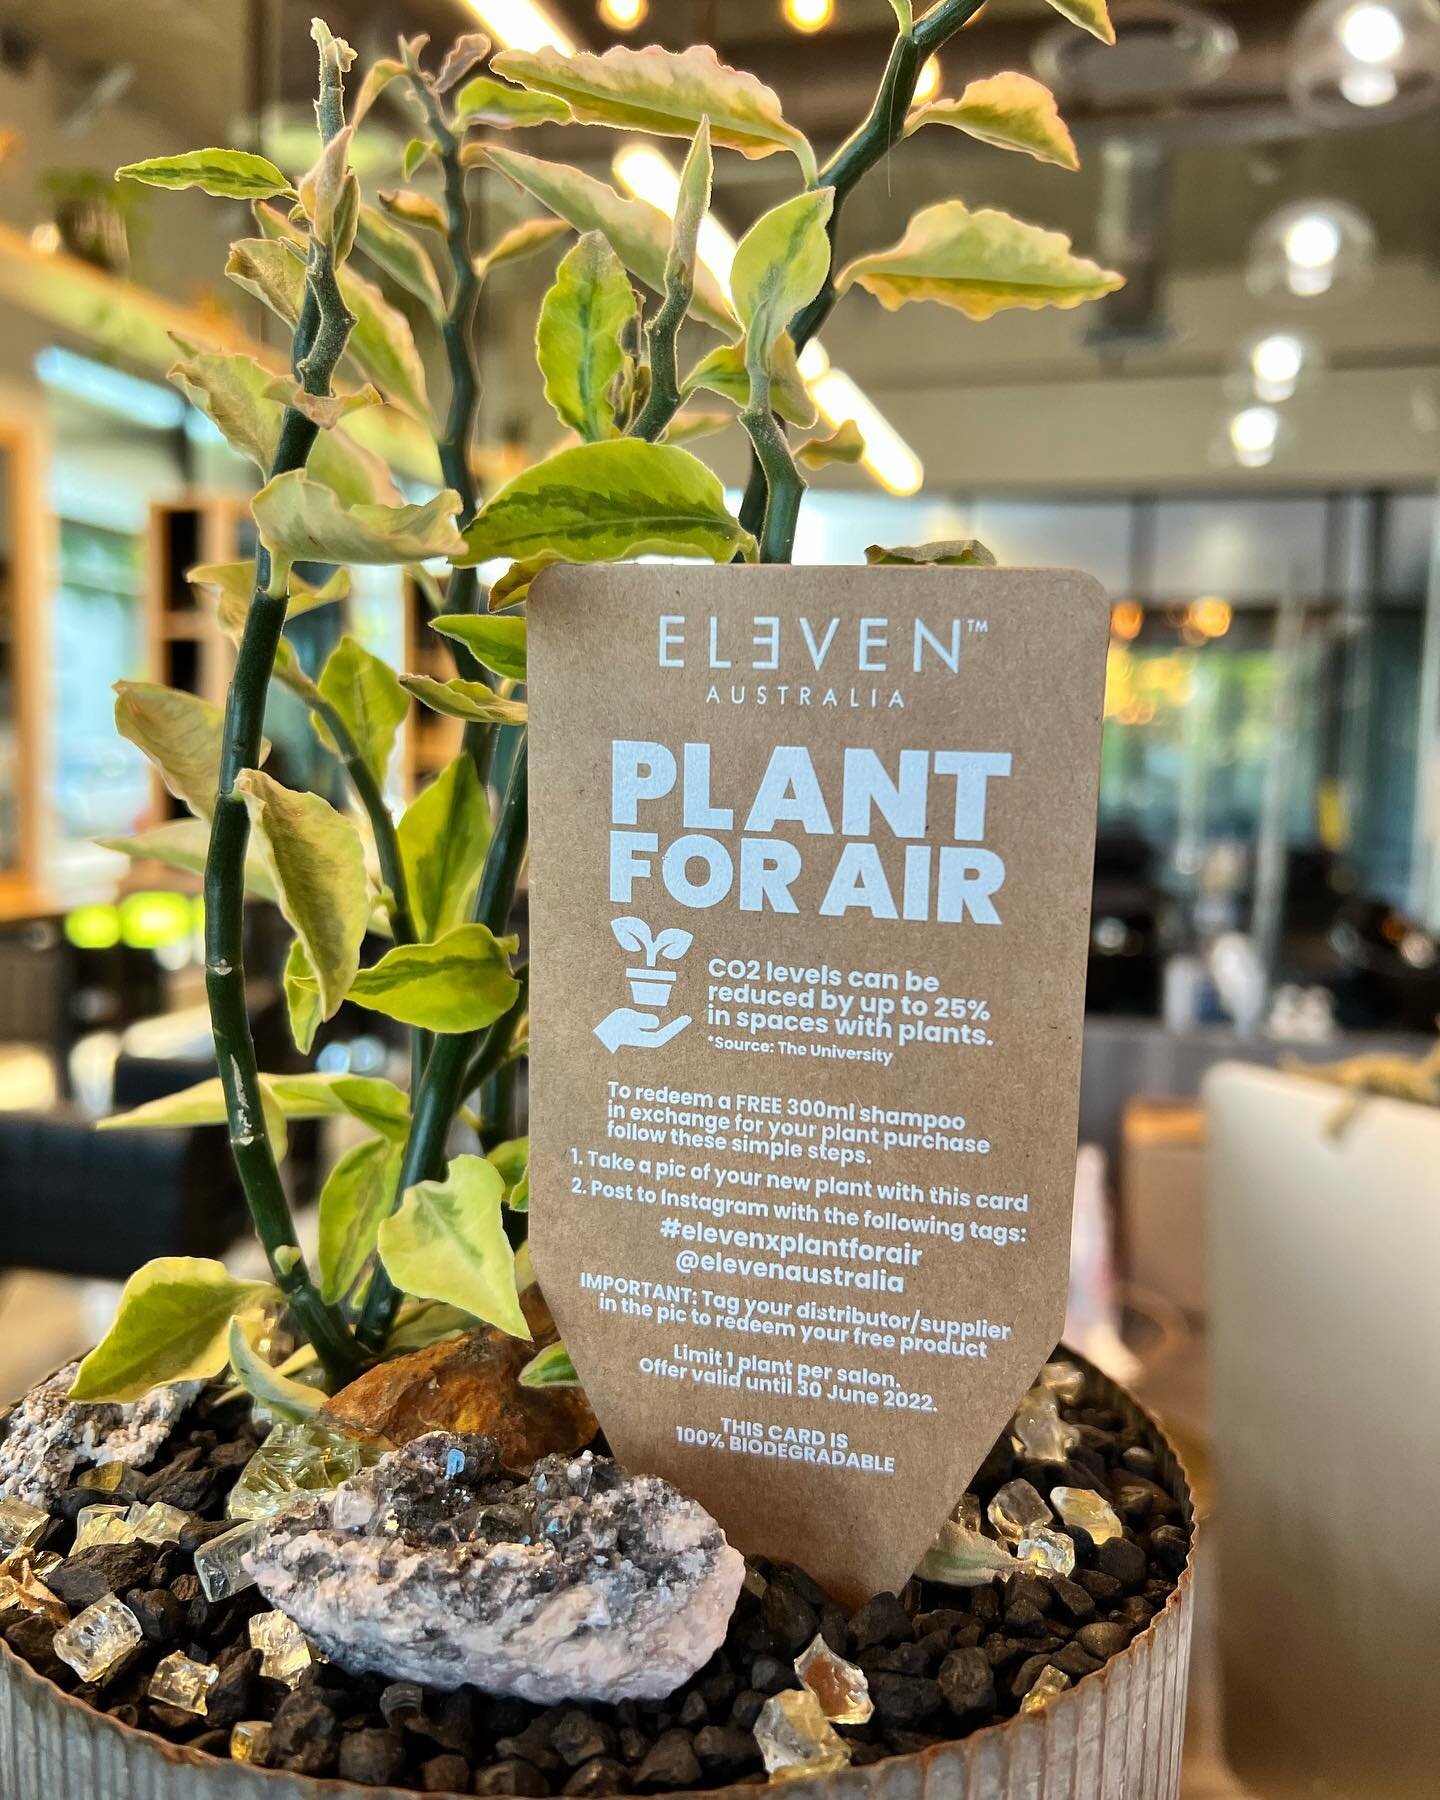 During the month of June, salons are given complimentary ELEVEN Australia x Plant For Air Cards and are encouraged to purchase a plant, post an image of it in their salon with the hashtag #elevenxplantforair @elevenaustralia in exchange for a free fu